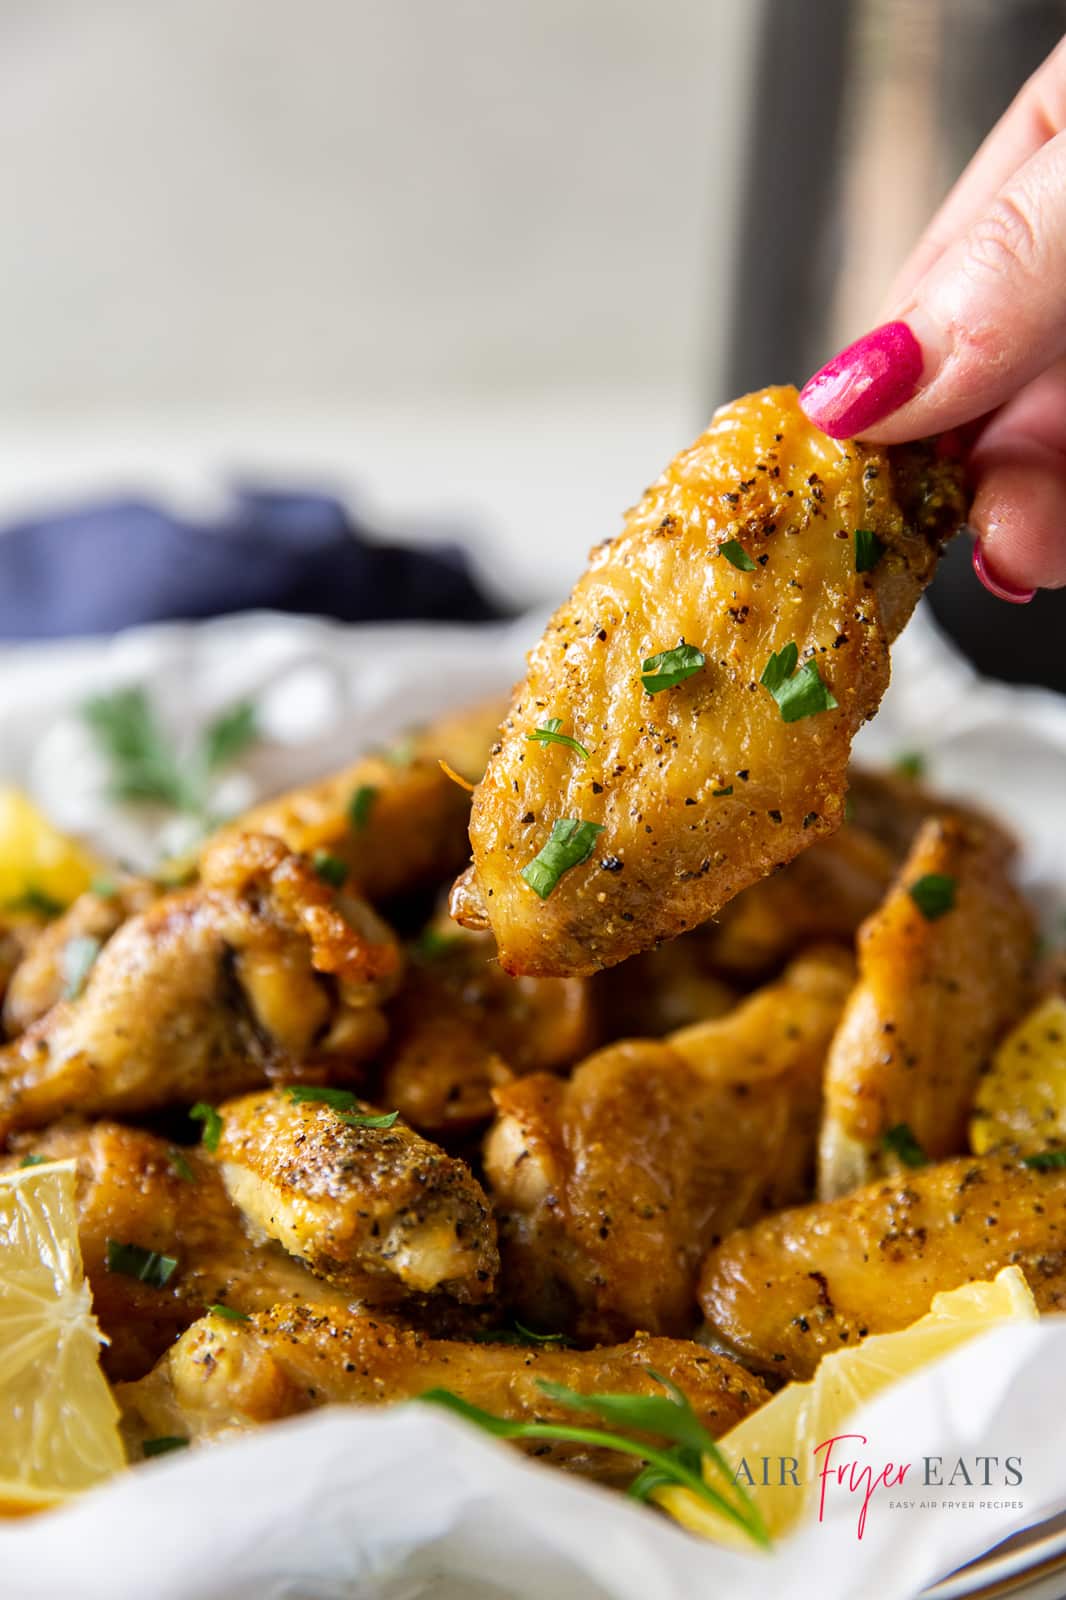 a plate of lemon pepper chicken wings. a hand is picking up a flat wing.